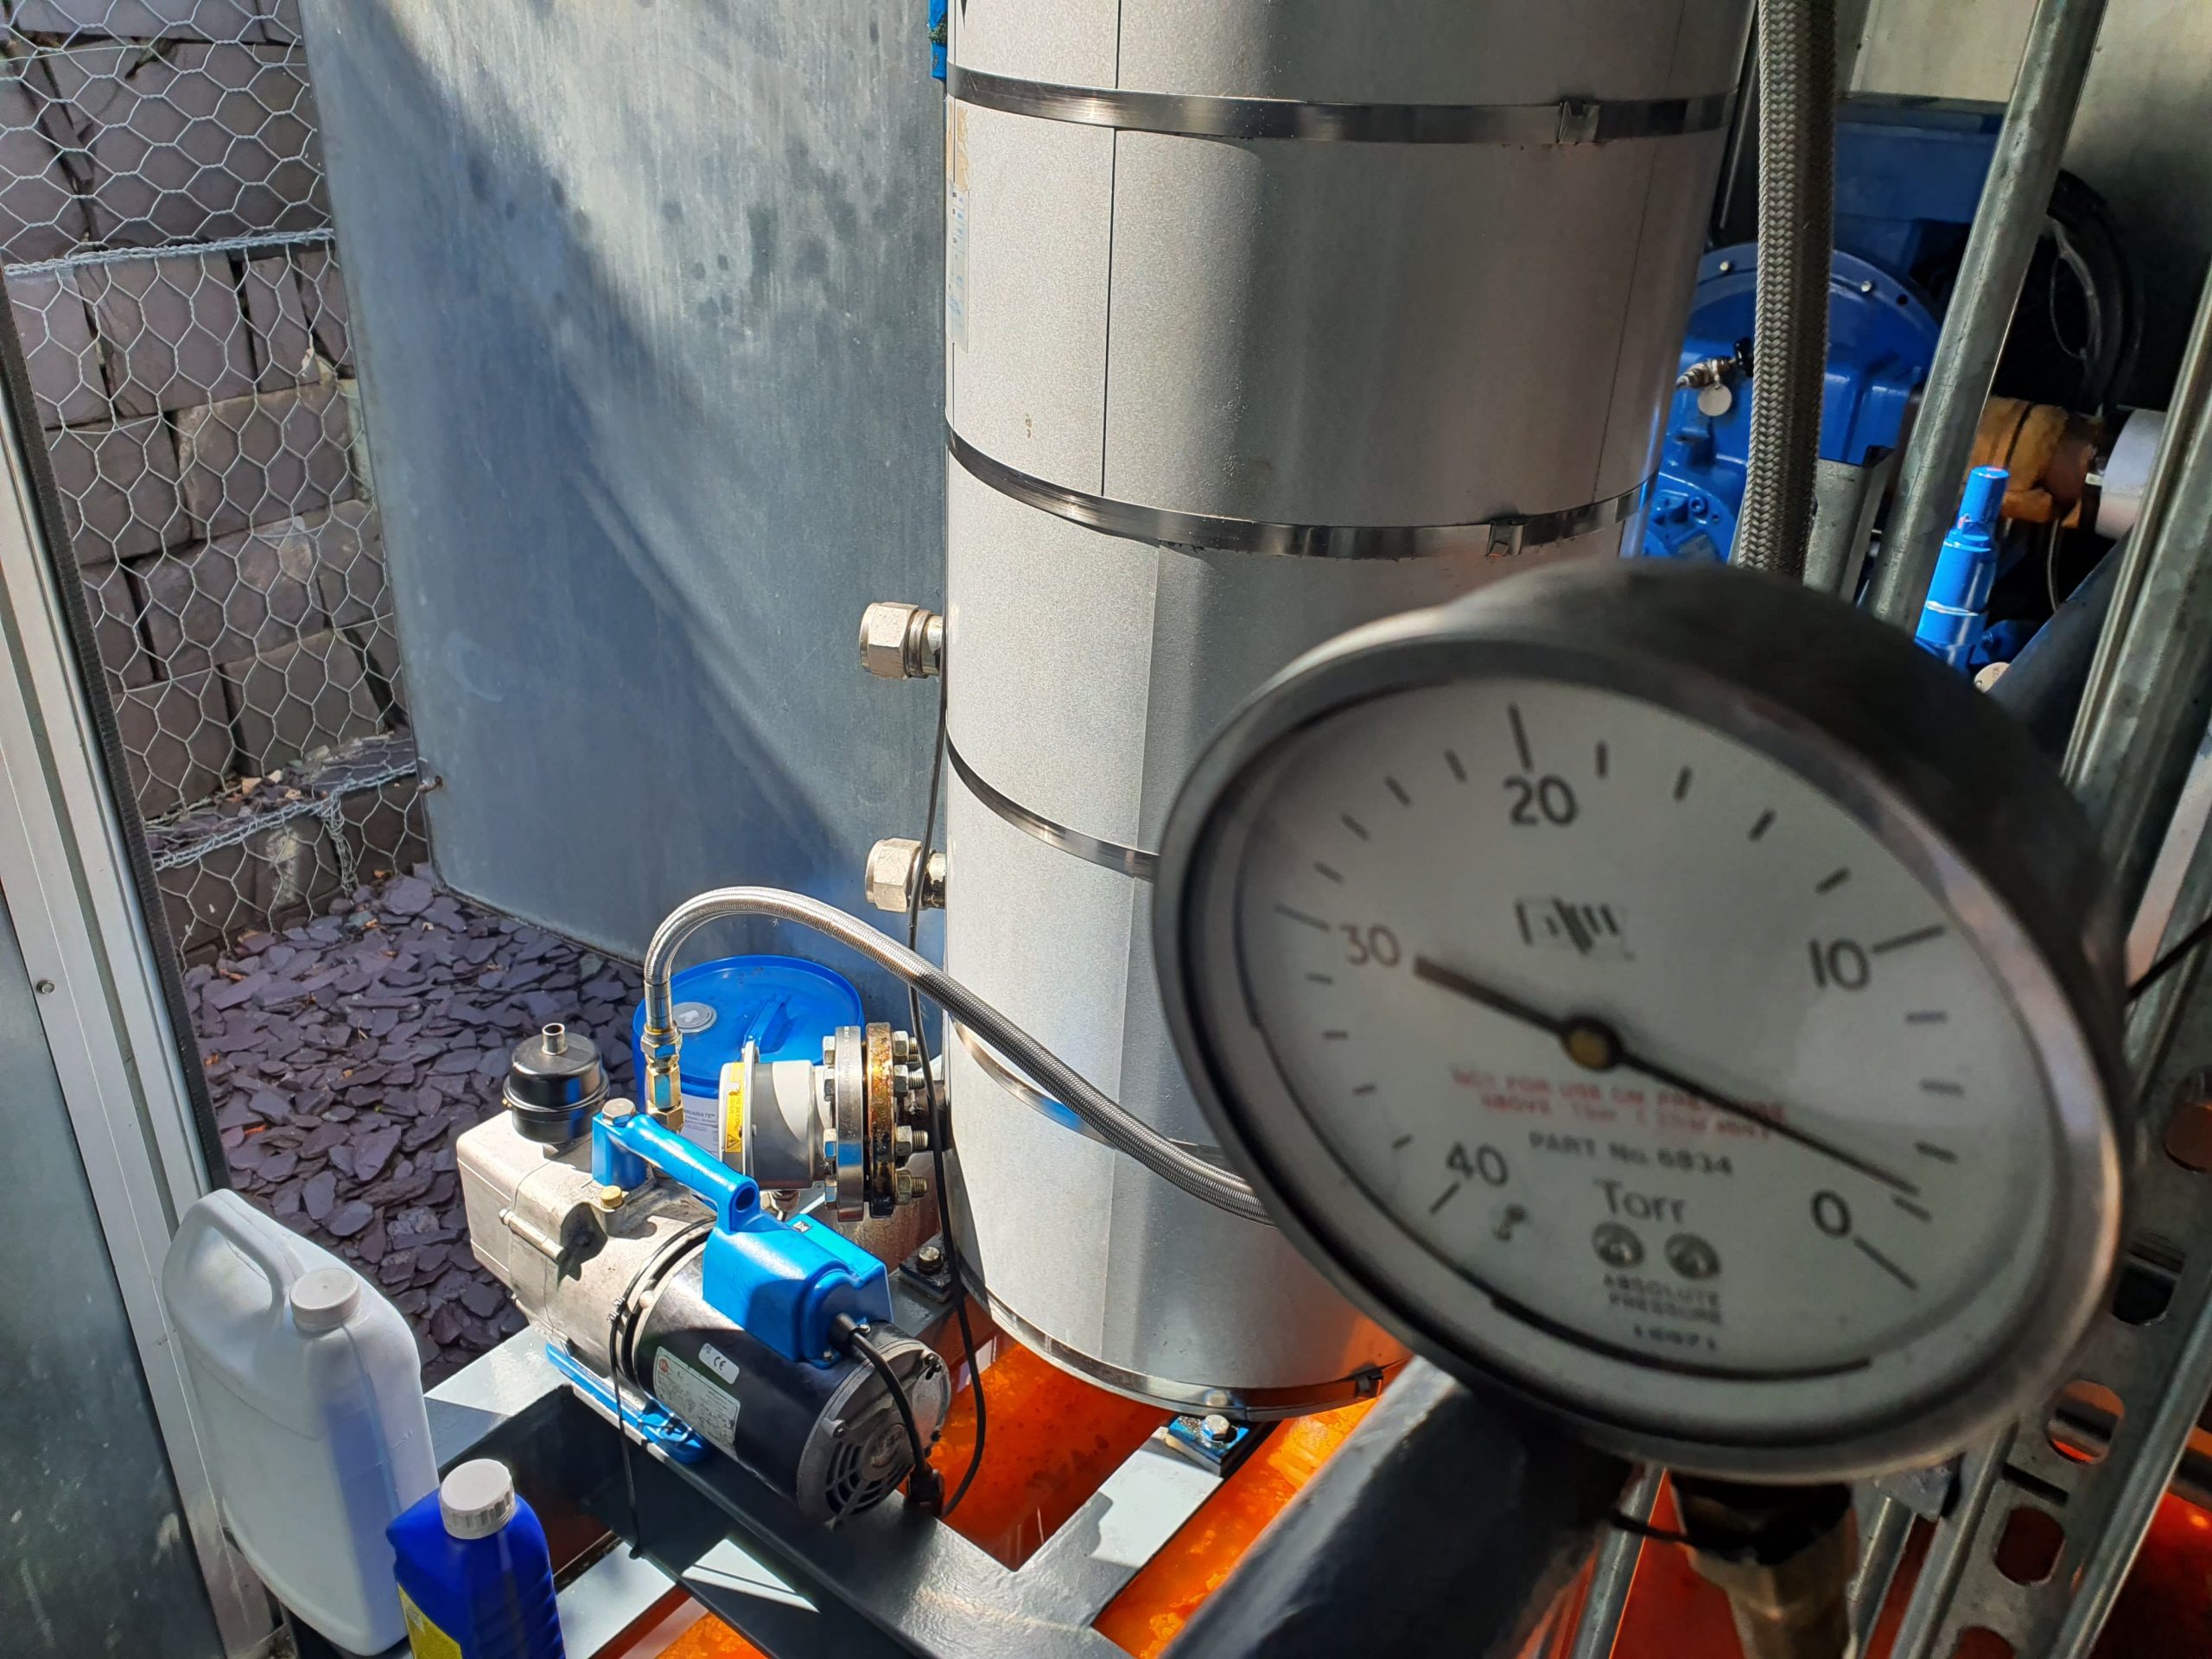 2 Torr showing on a gauge during process chiller vacuum service